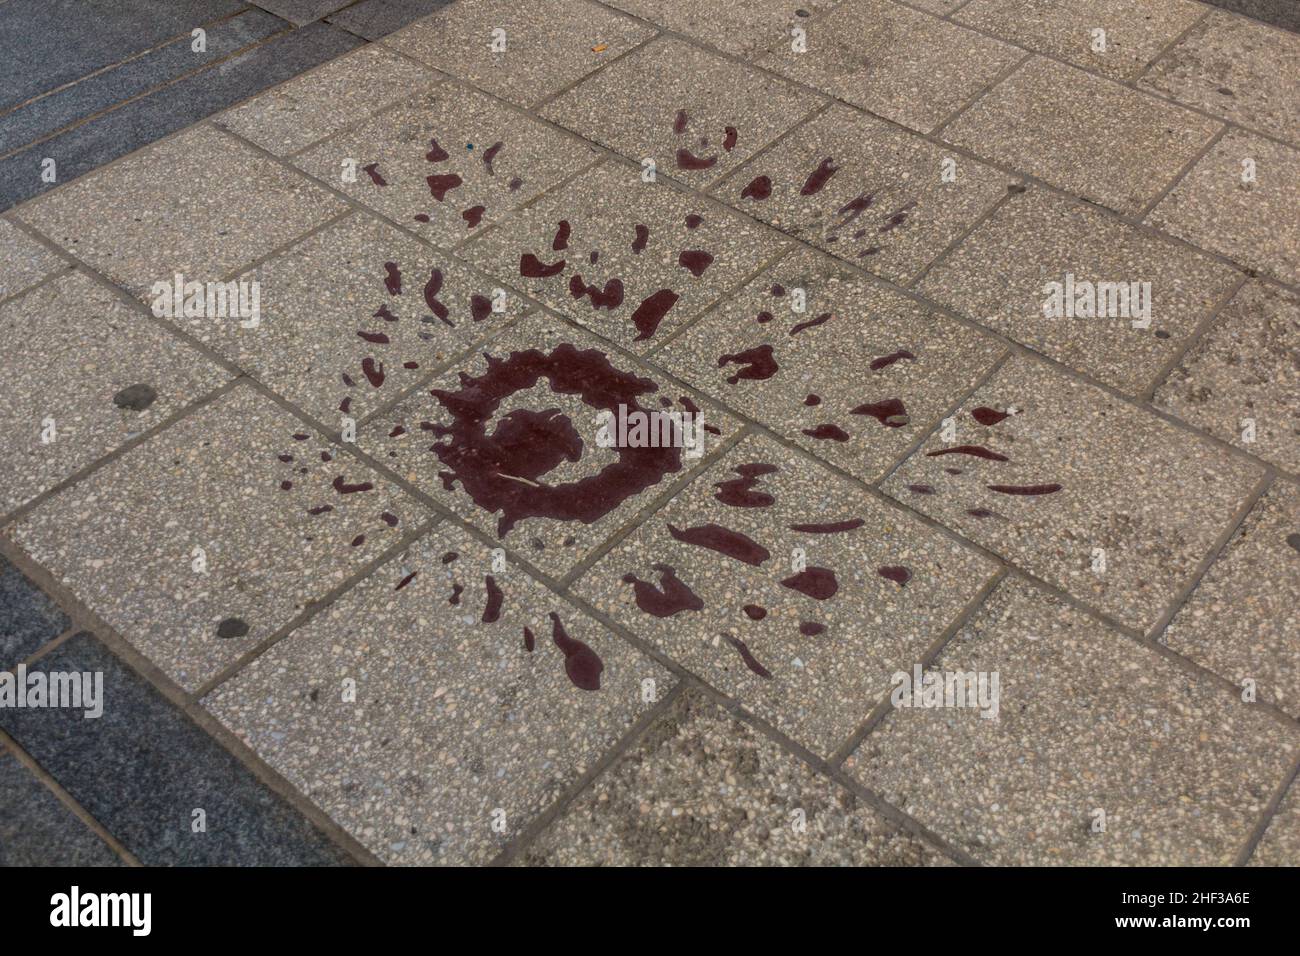 Rose of Sarajevo marking a place of mortar shells explosions during the Siege of Sarajevo in Bosnia and Herzegovina. Stock Photo